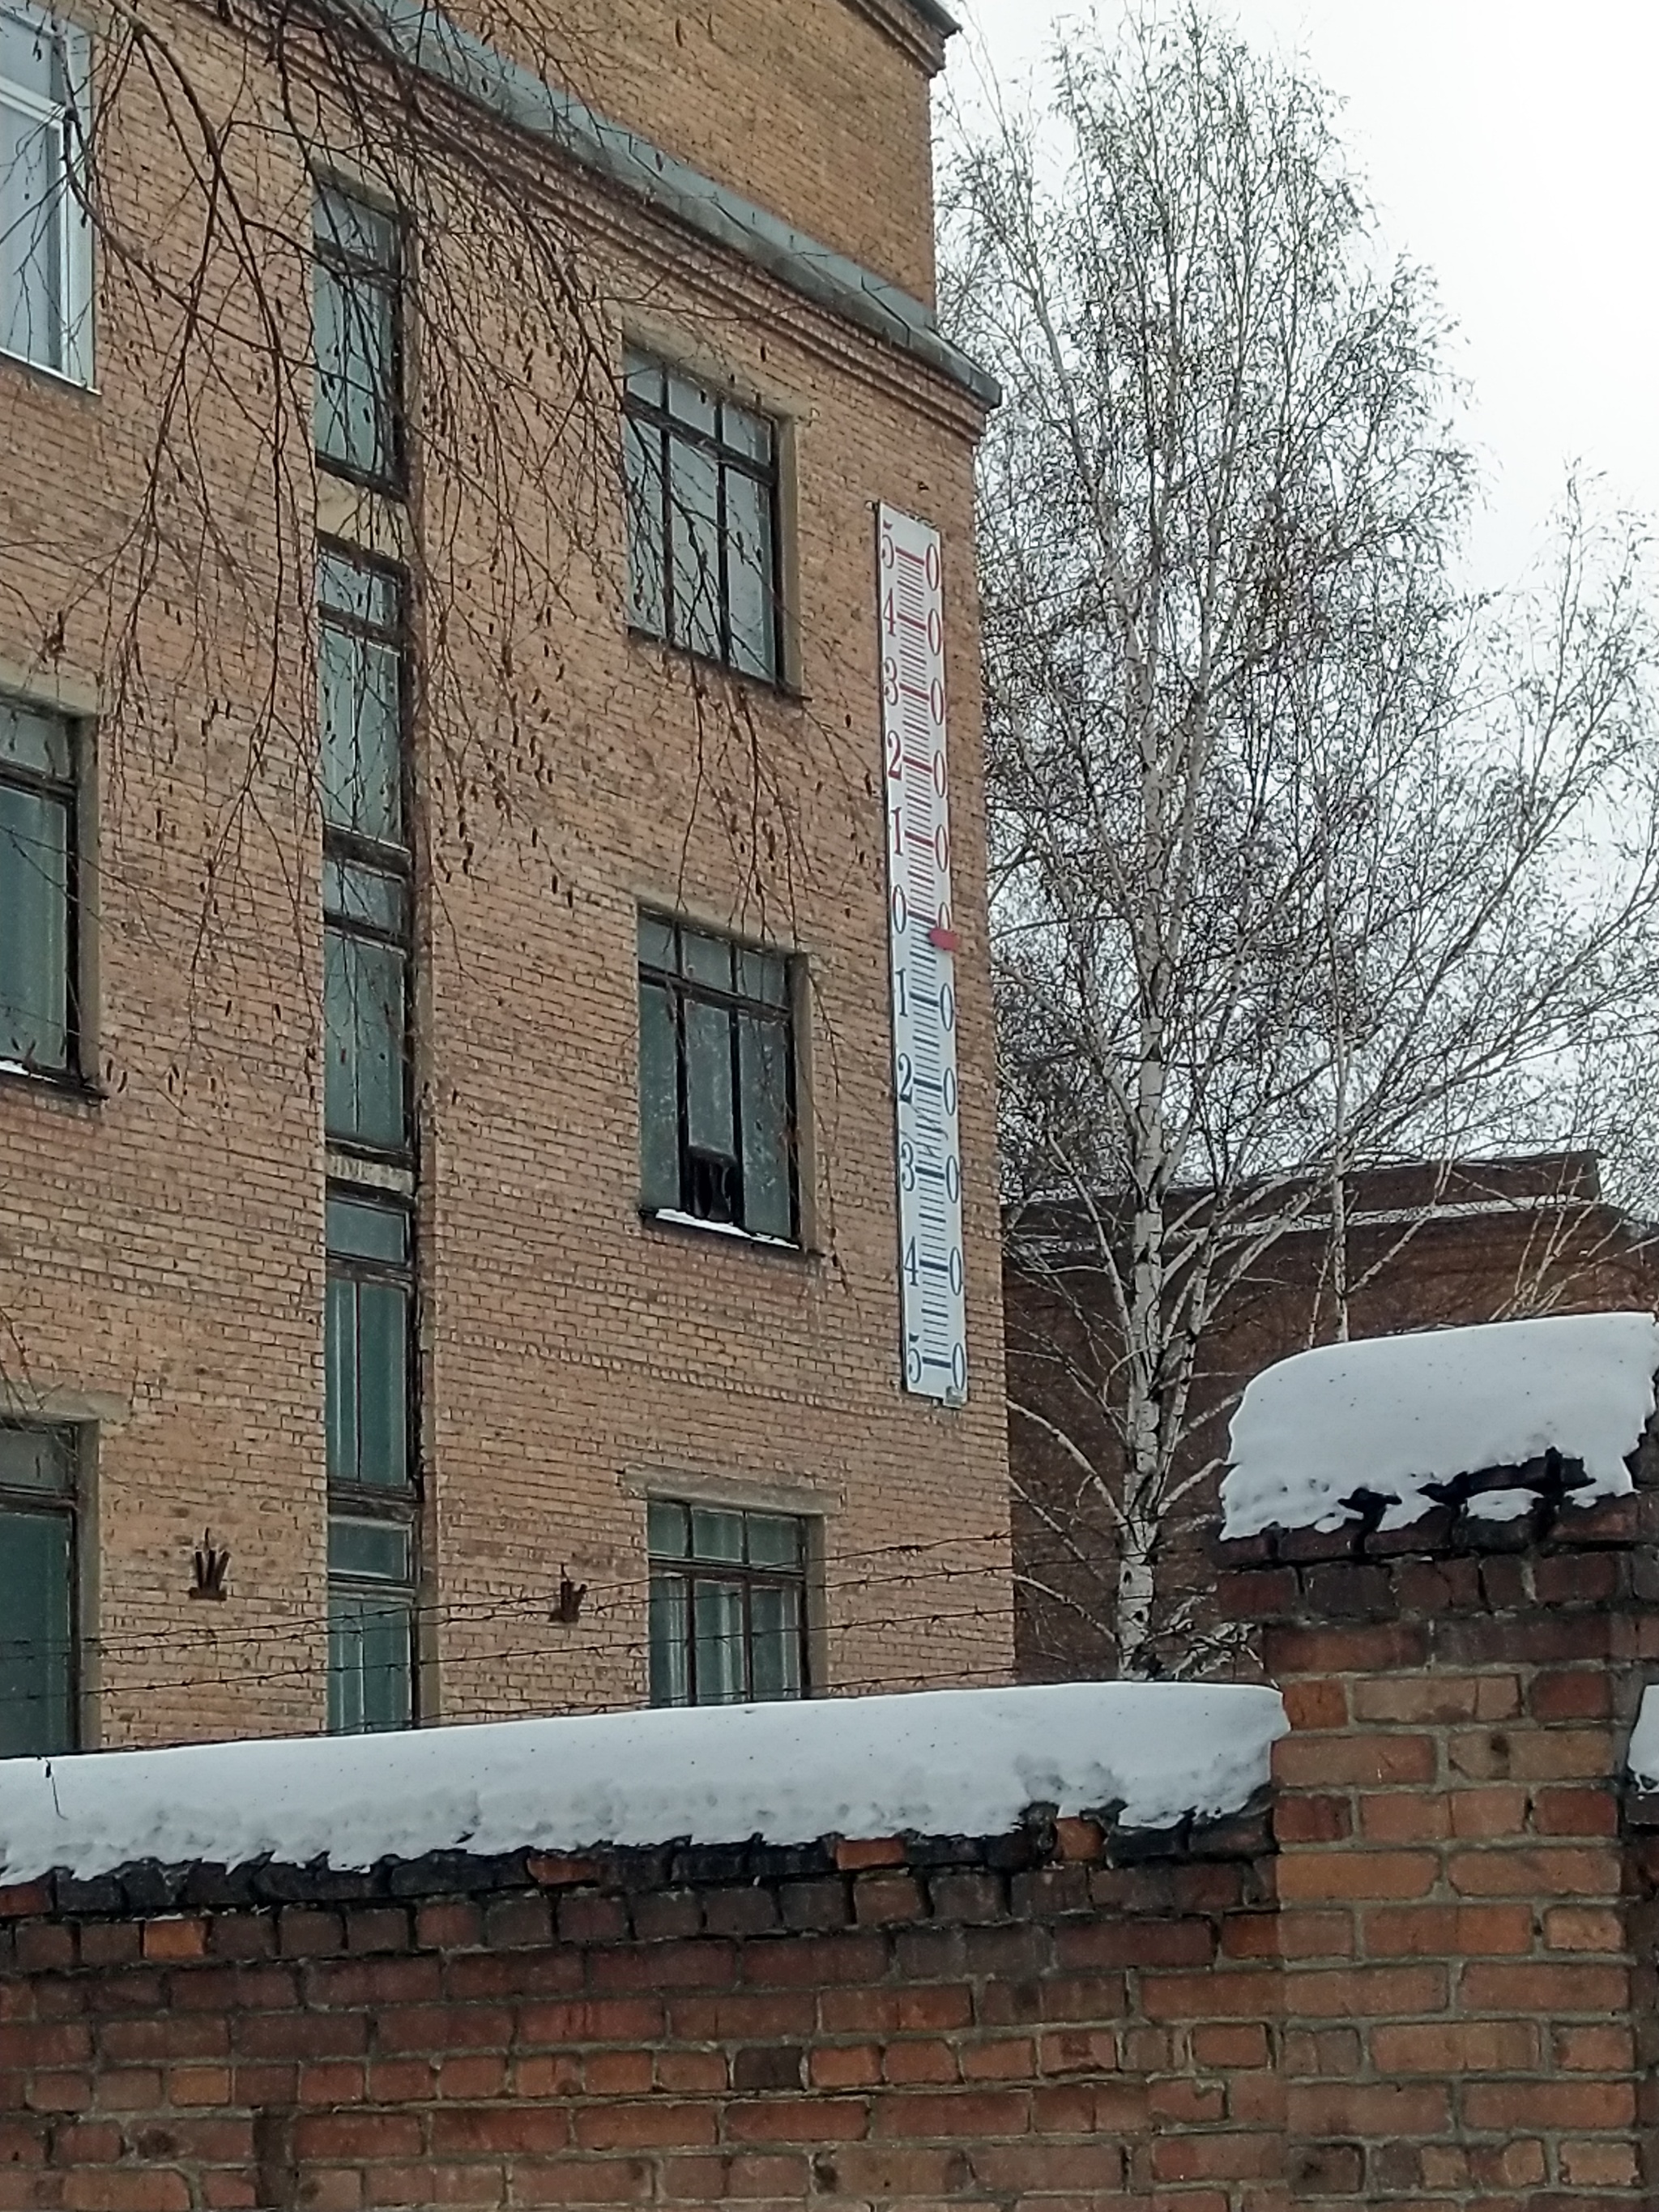 Nothing unusual, just a wall thermometer in the city of Ust-Kamenogorsk. By the way, it shows almost correctly - My, Kazakhstan, Ust-Kamenogorsk, All-Russian Research Institute, Longpost, Thermometer